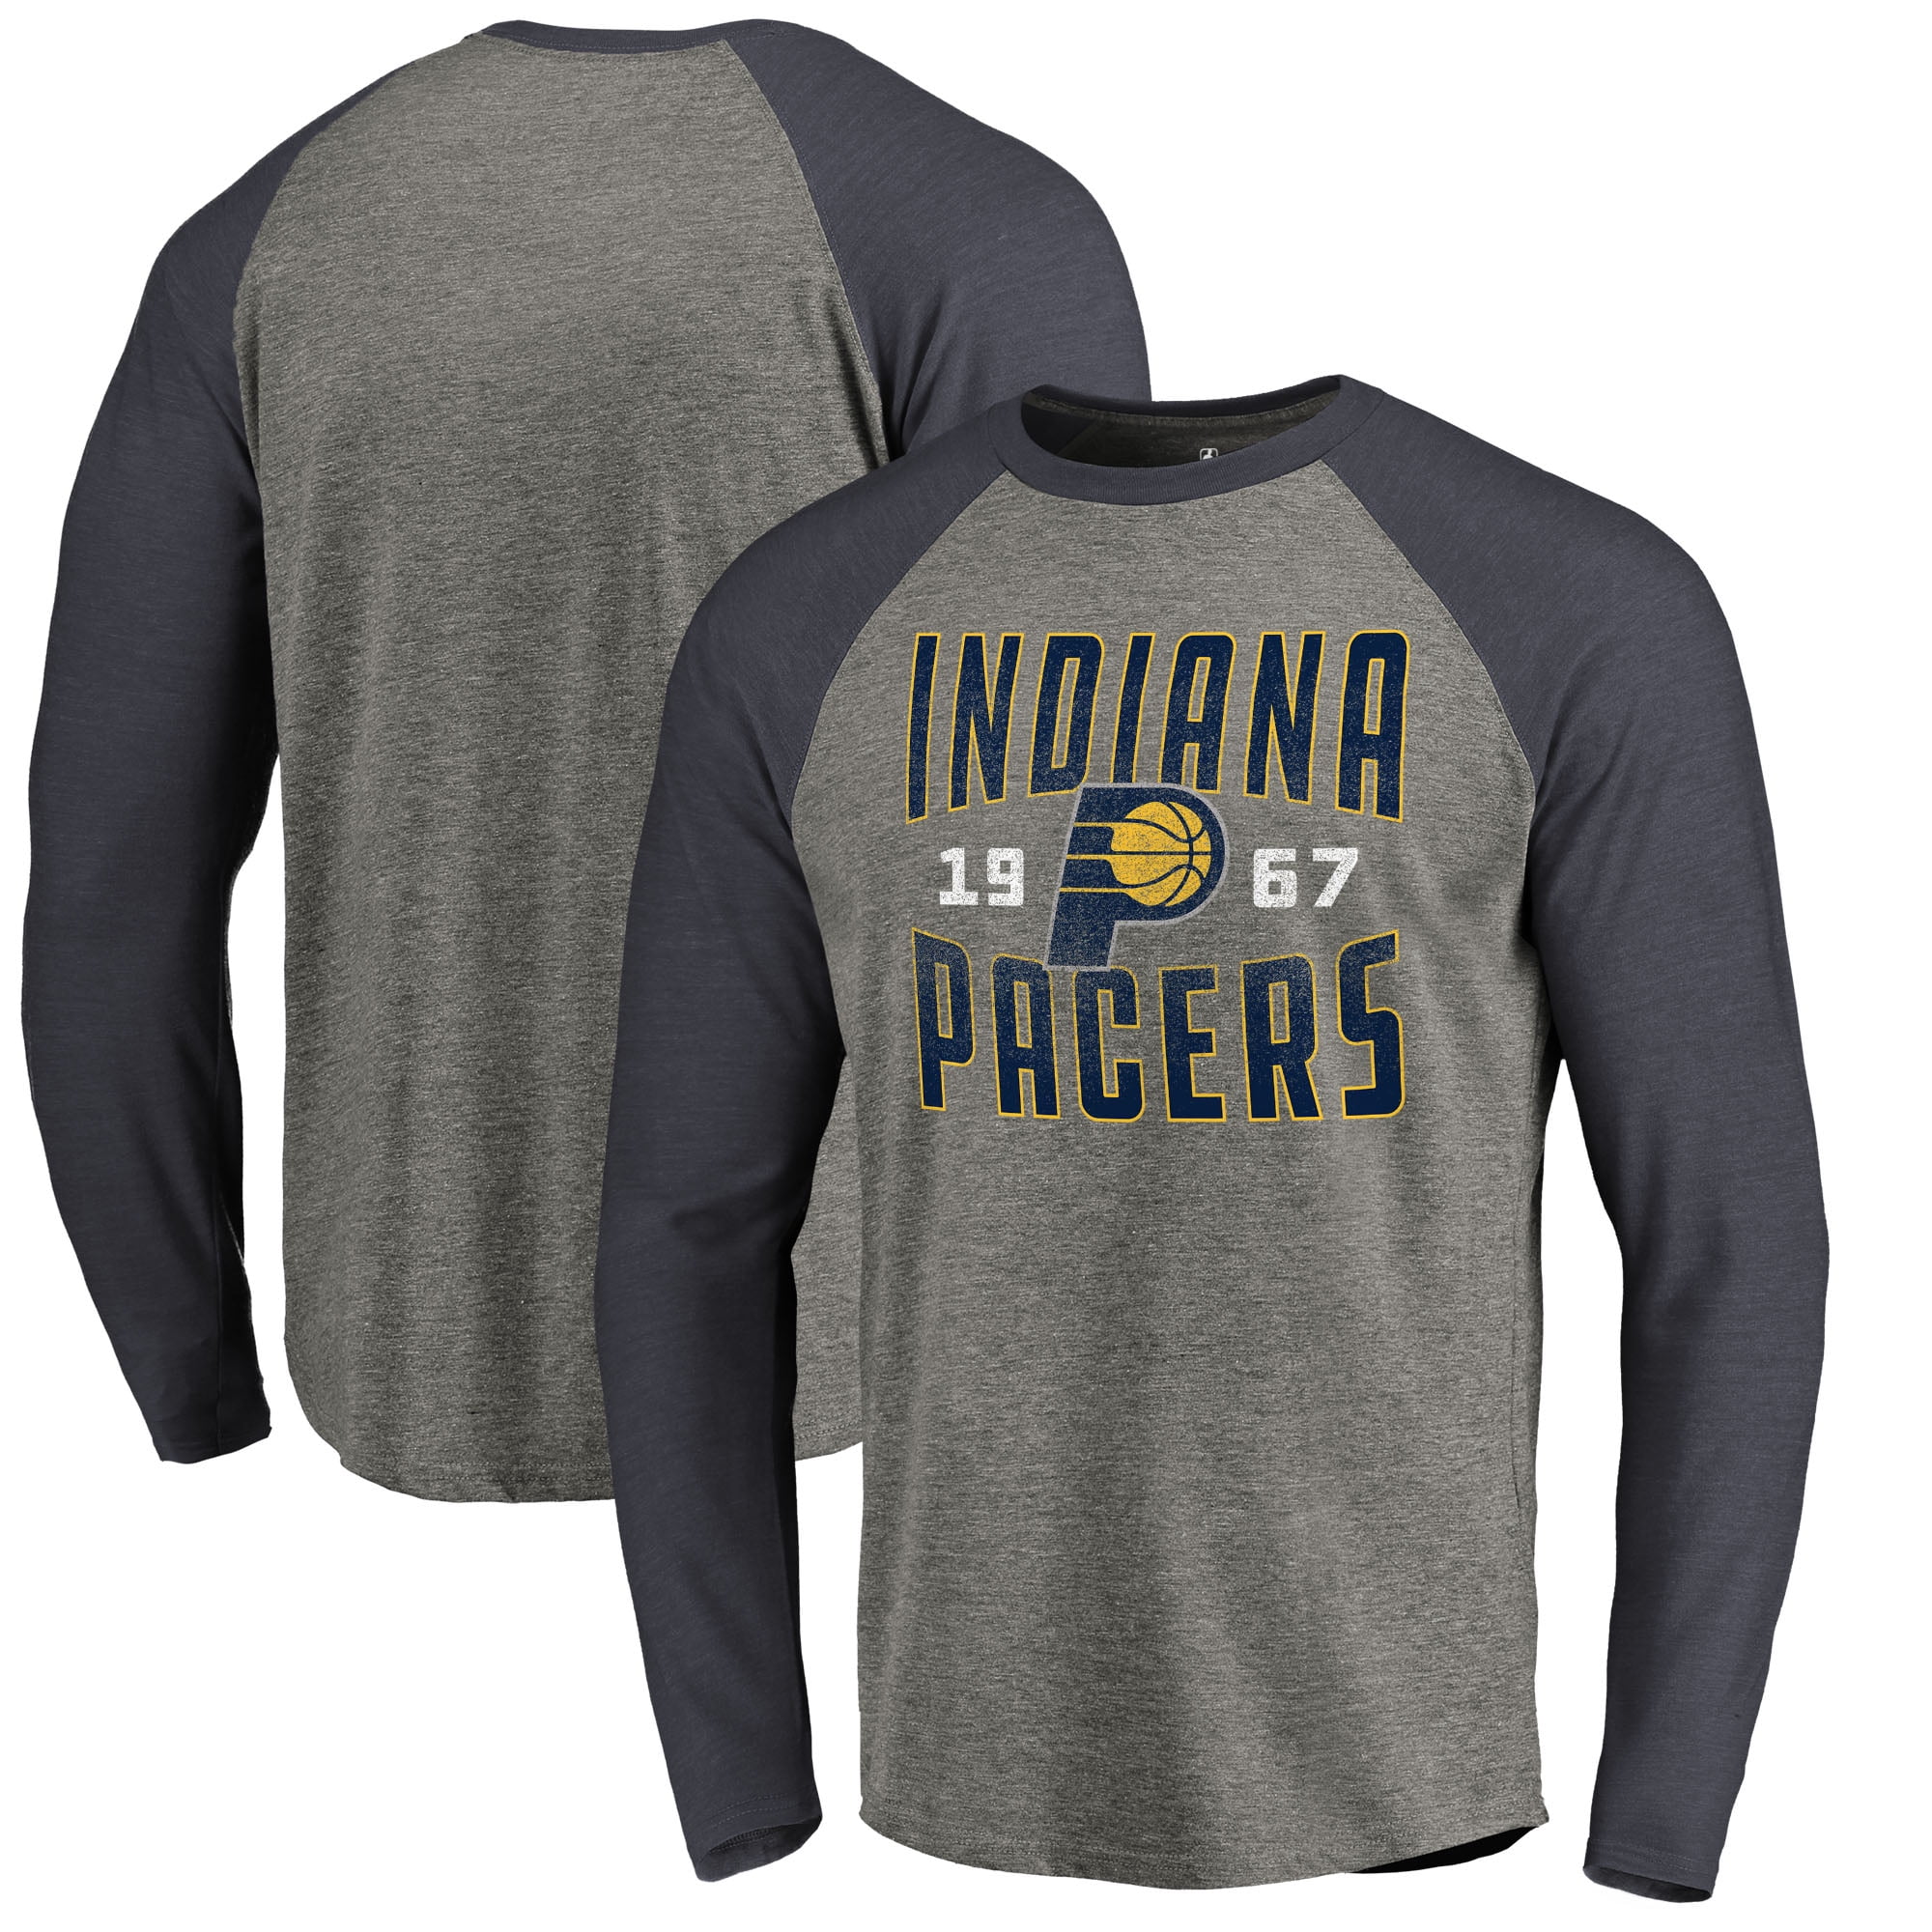 pacers sleeved jersey